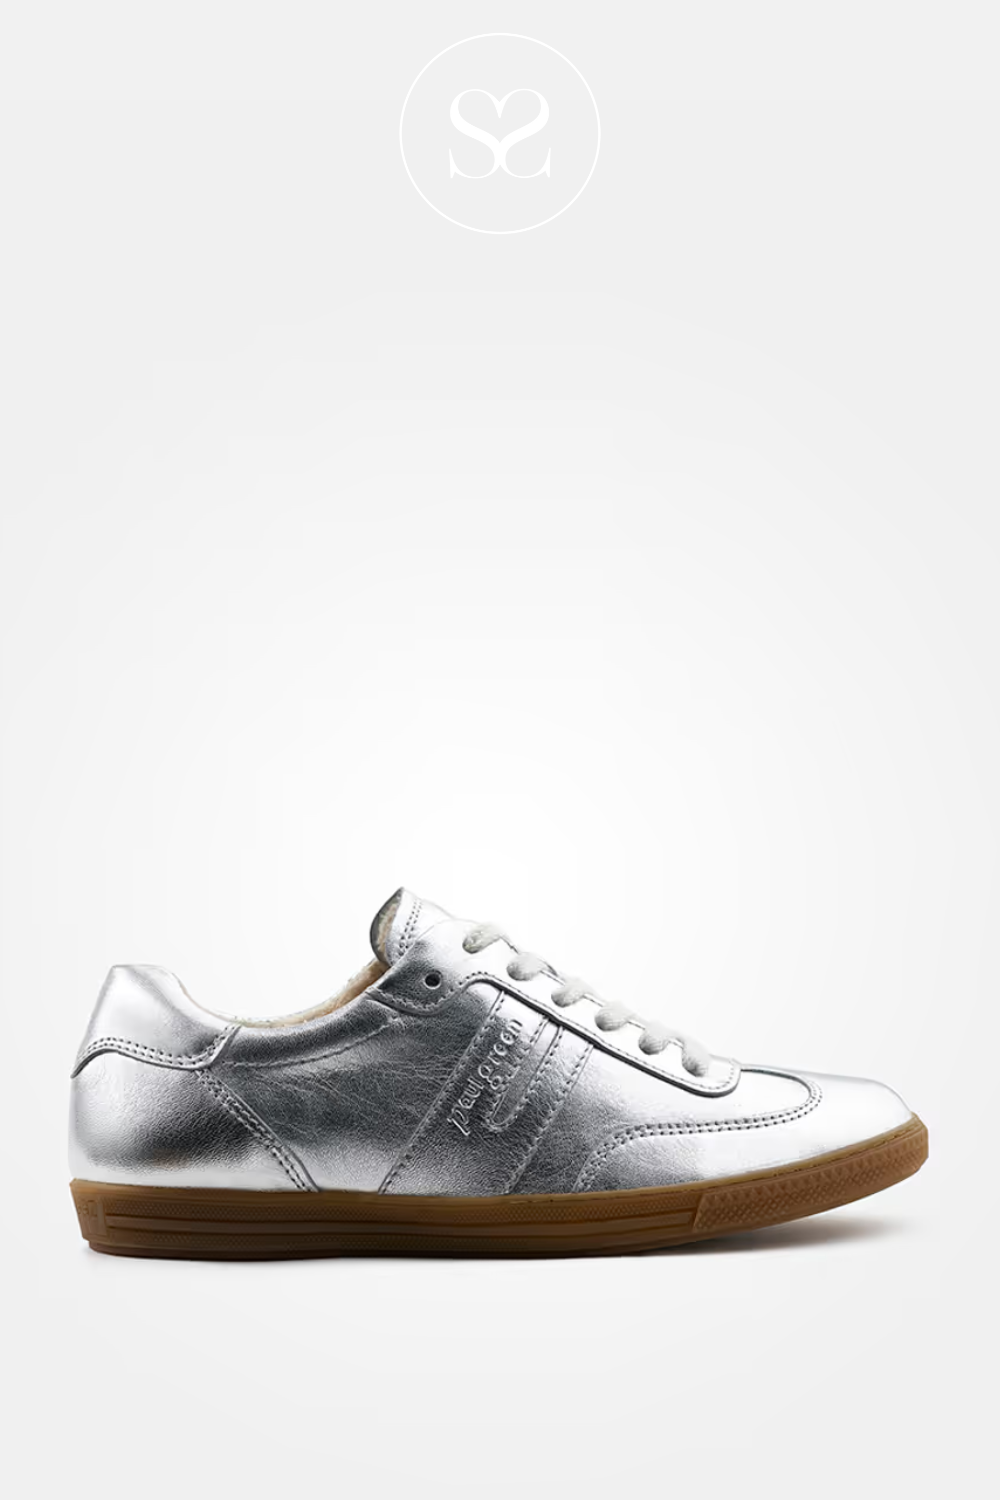 PAUL GREEN 5350 SILVER LEATHER SPORTY TRAINERS